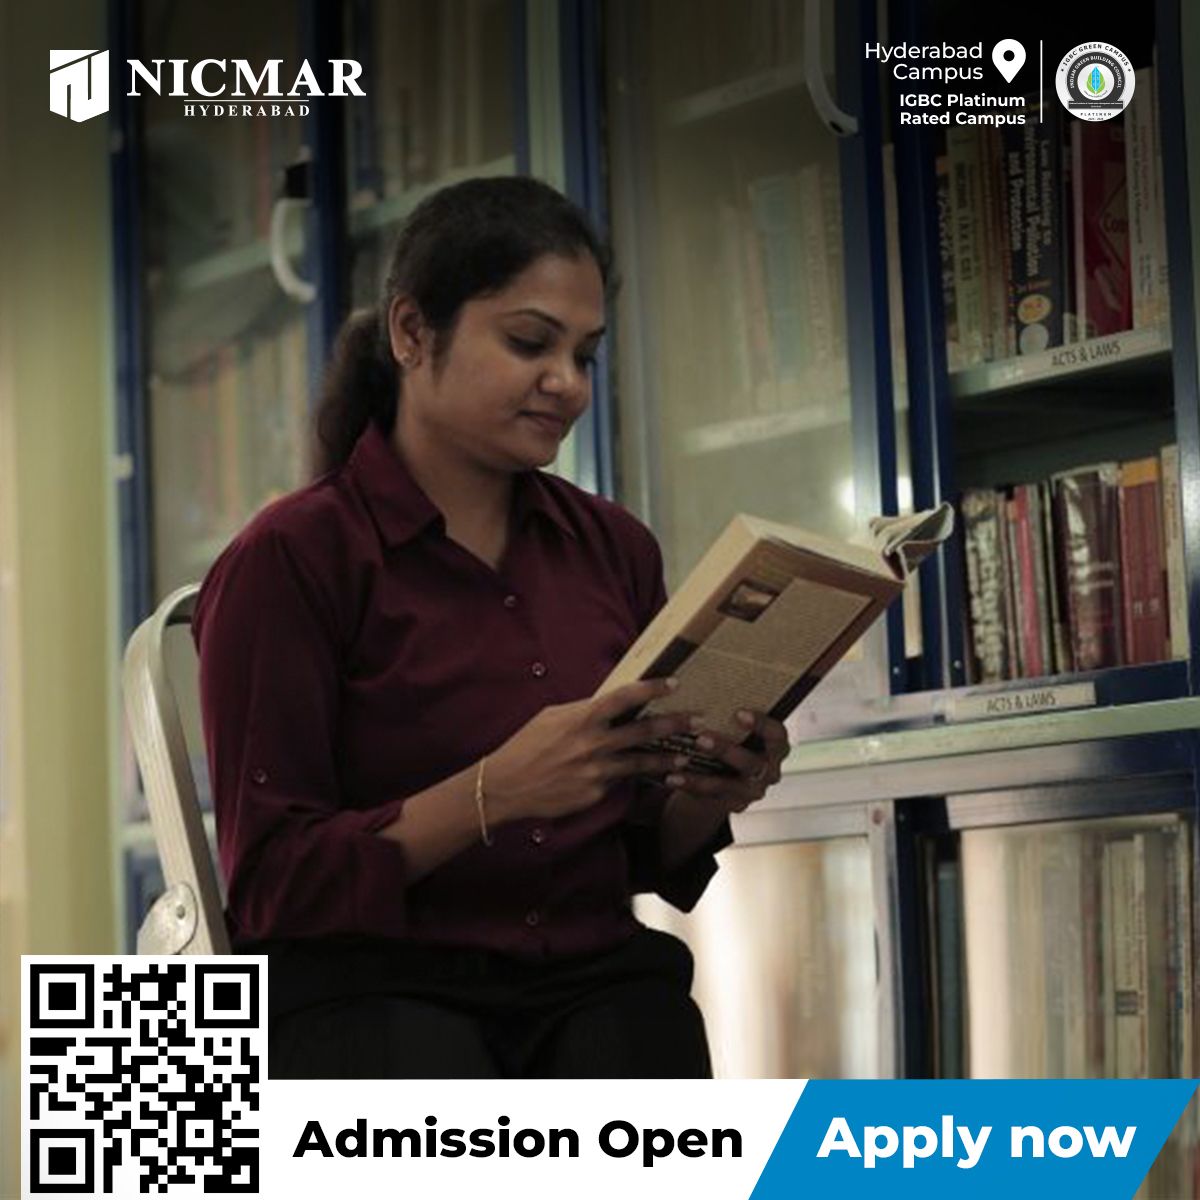 Discover limitless knowledge at NICMAR Hyderabad's library – your essential companion for academic excellence.

#NICMARHyderabad #LibraryResources #CollegeJourney #ResearchSkills #StudyTips #KnowledgeHub